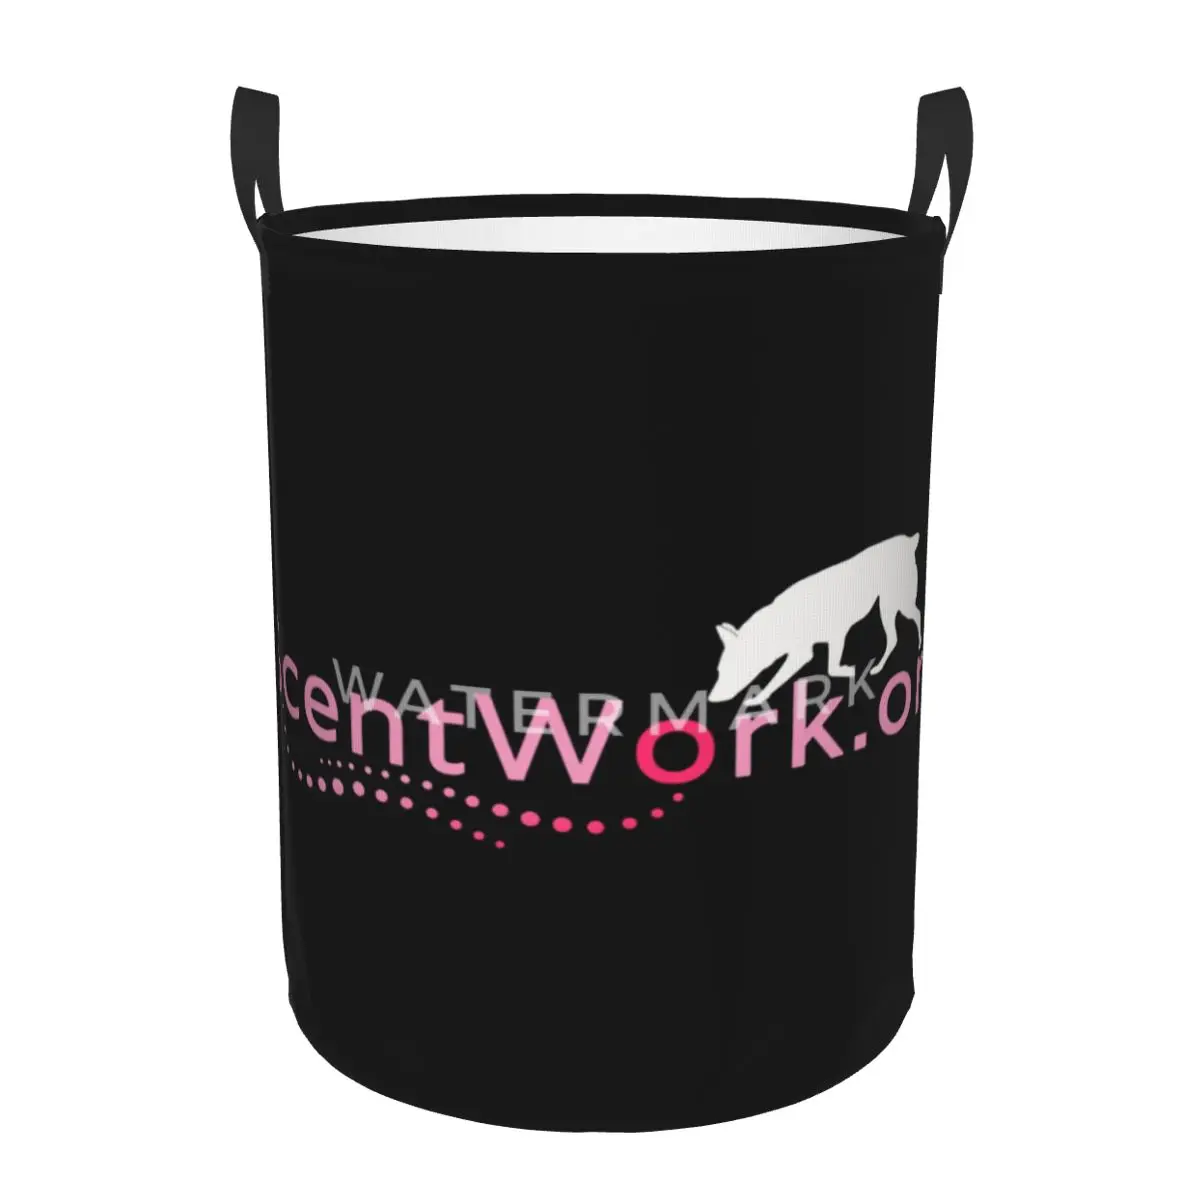 

ScentWork.org PINK For Charity Circular hamper,Storage Basket Sturdy and durable bathrooms toys